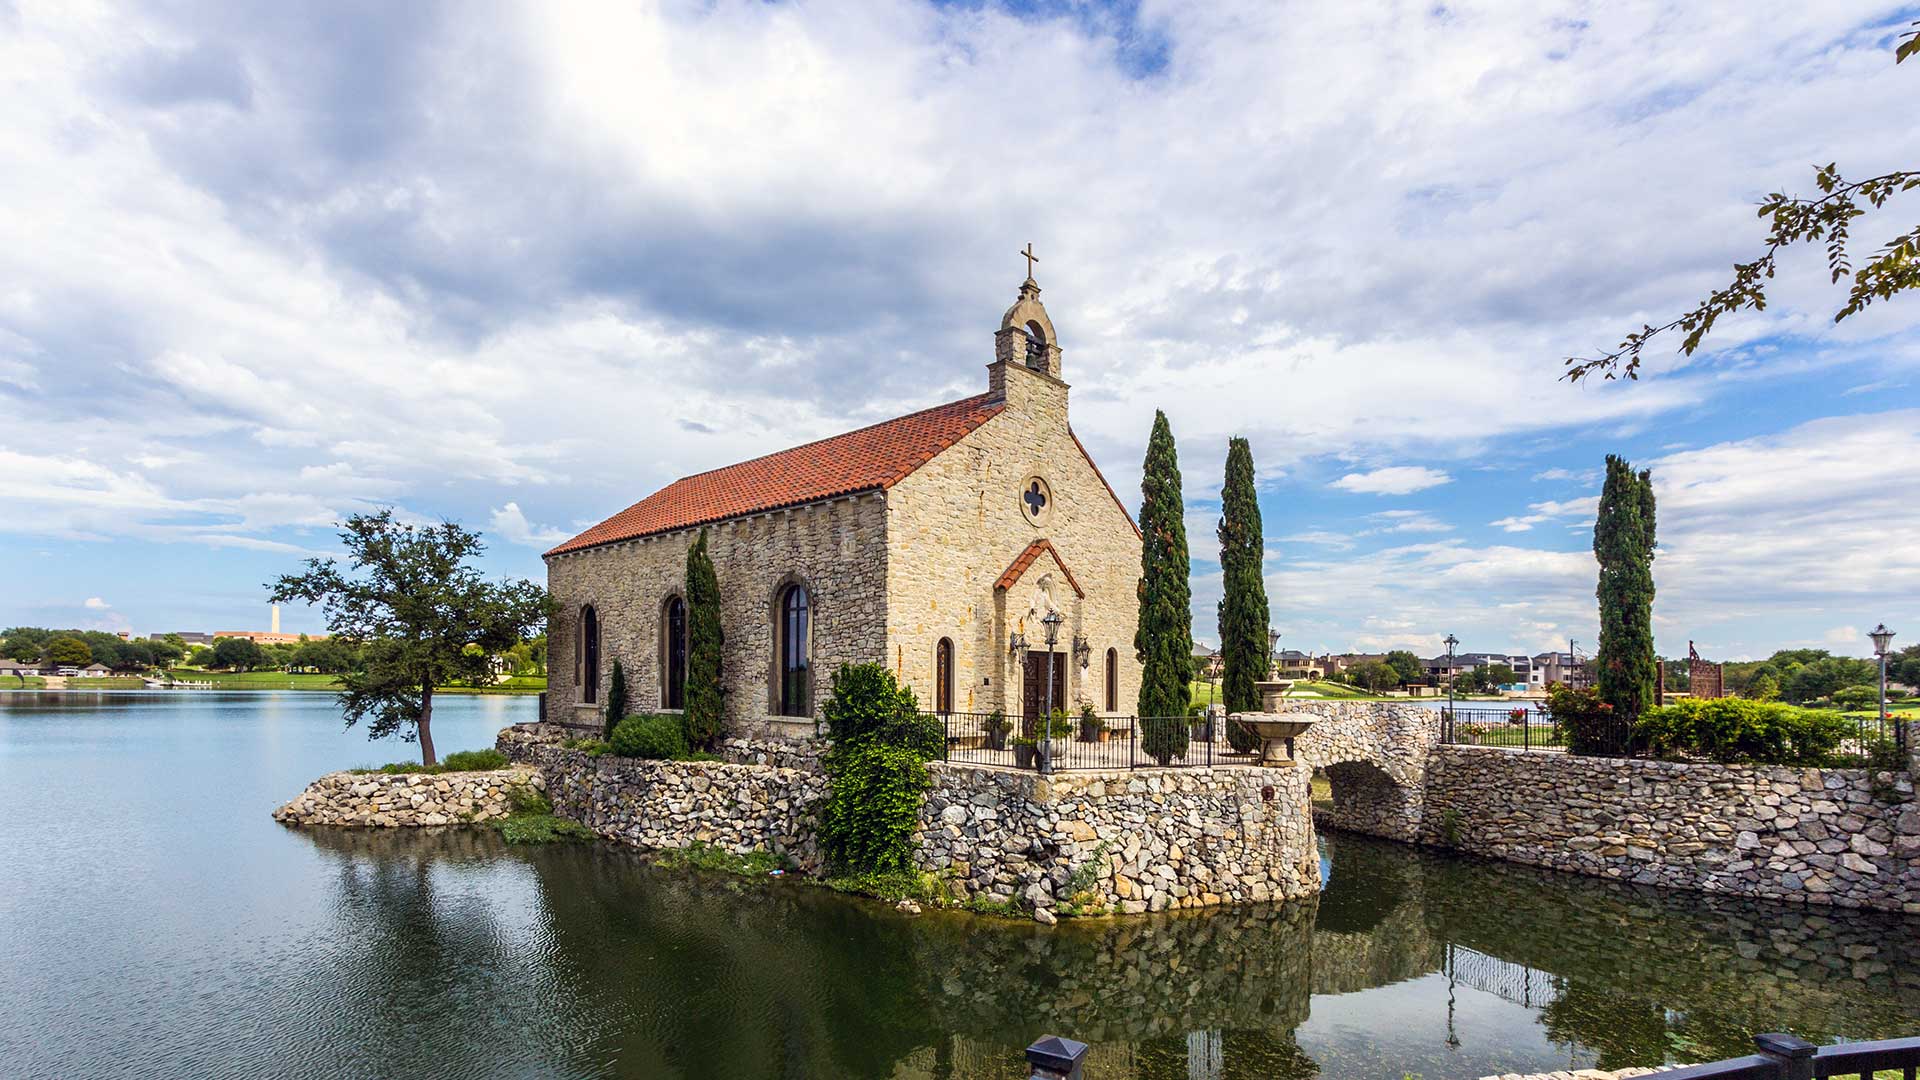 The Chapel at Adriatica sits on a stone foundation on the lake. It is a small stone structure with various plants around it.